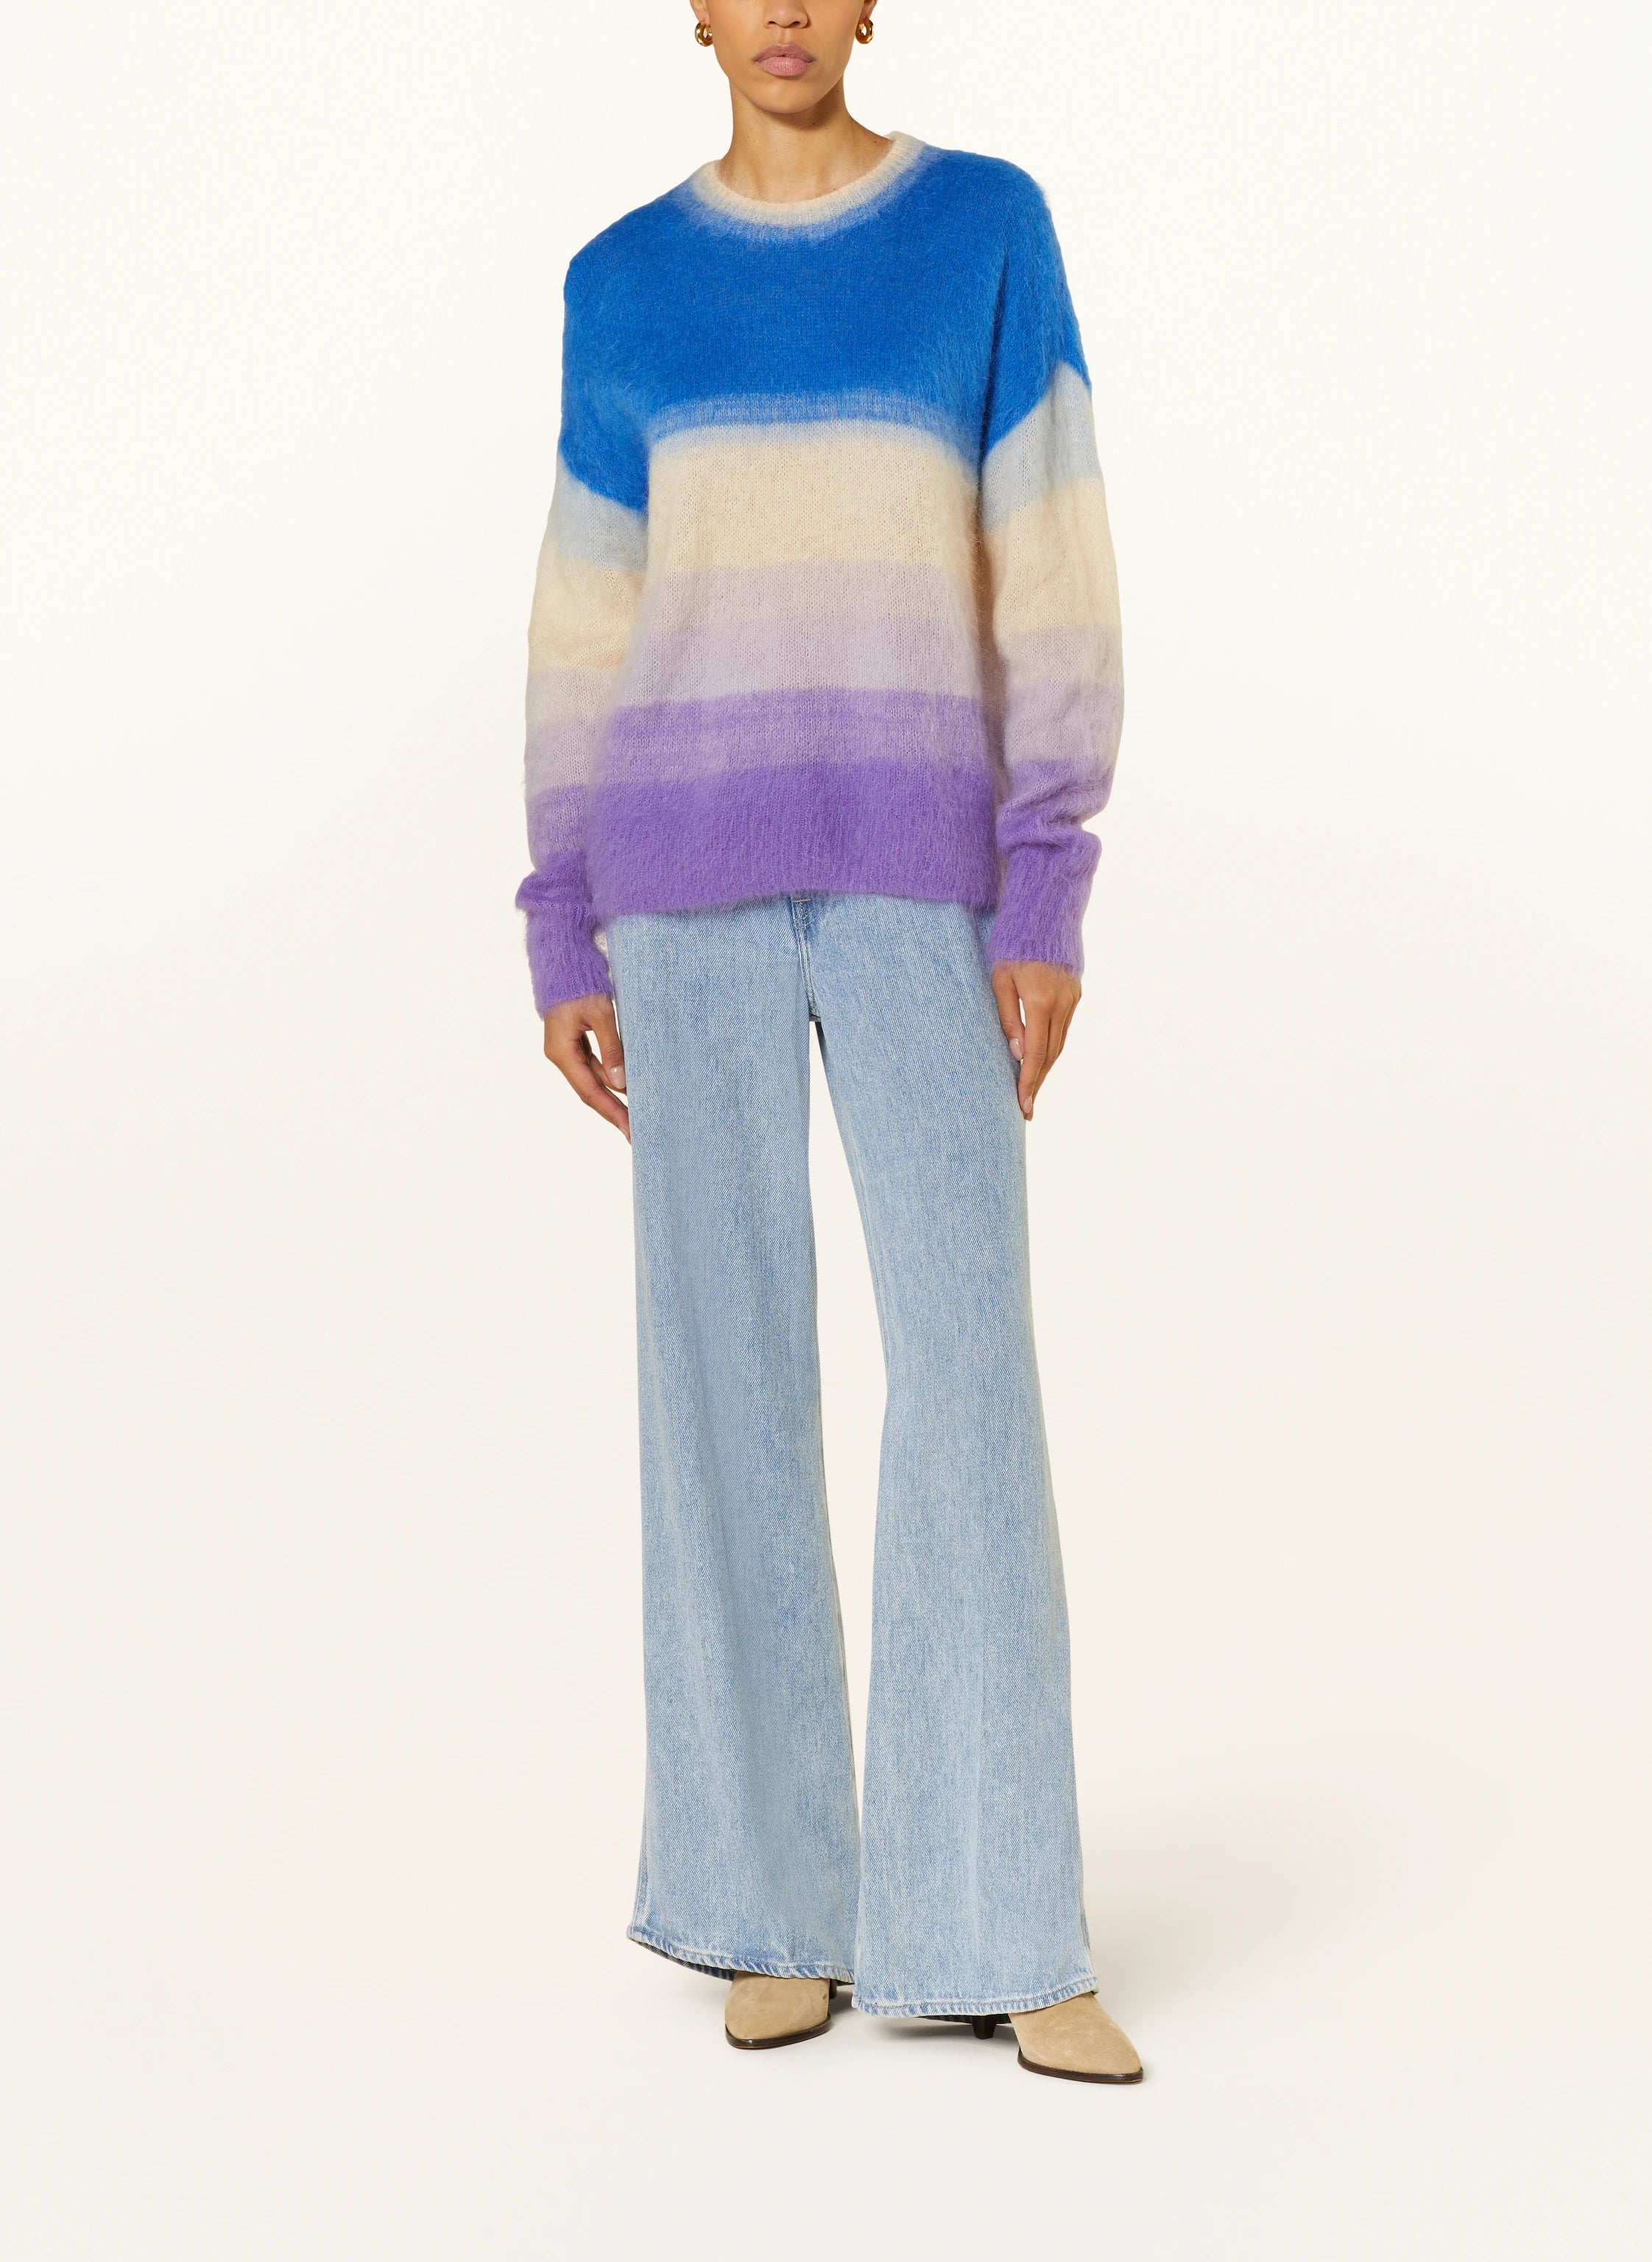 Isabel Marant Drussell Mohair Sweater - Blue/Purple